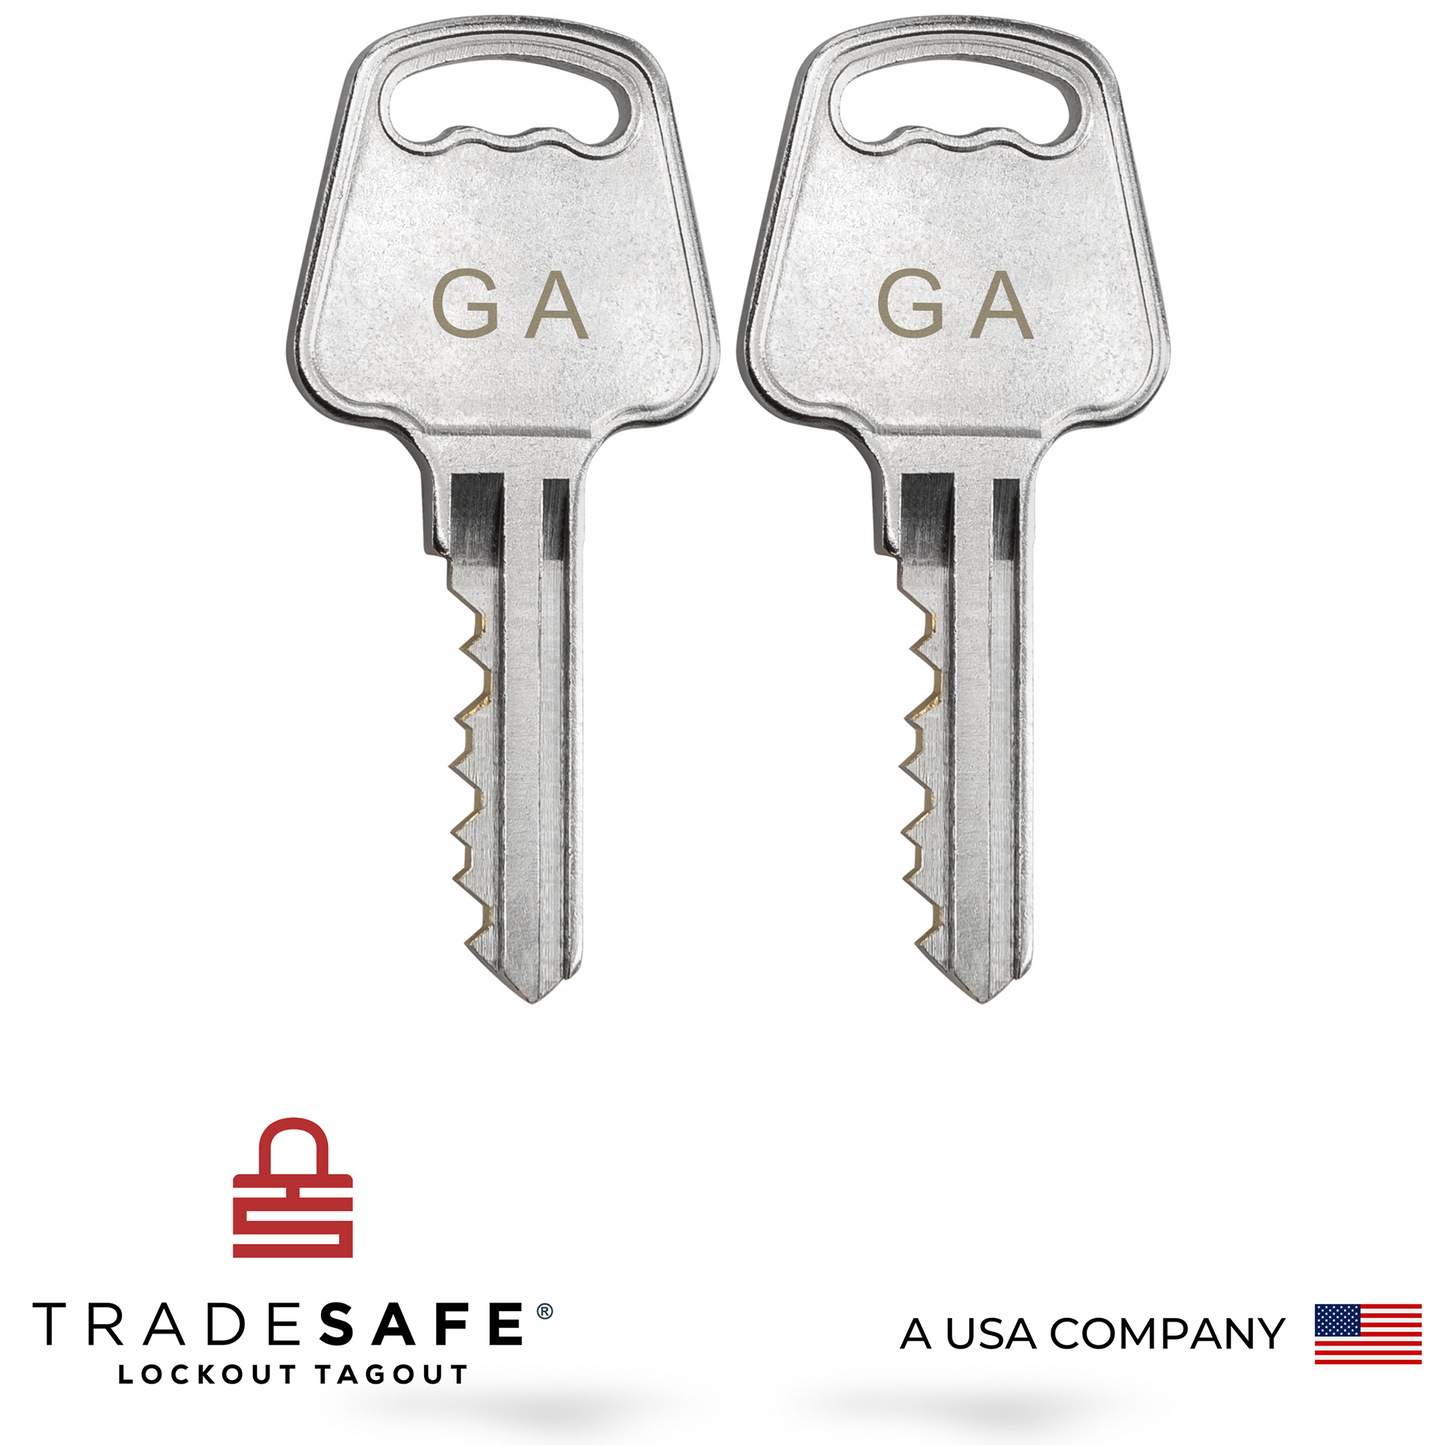 two keys, each with the letter code GA